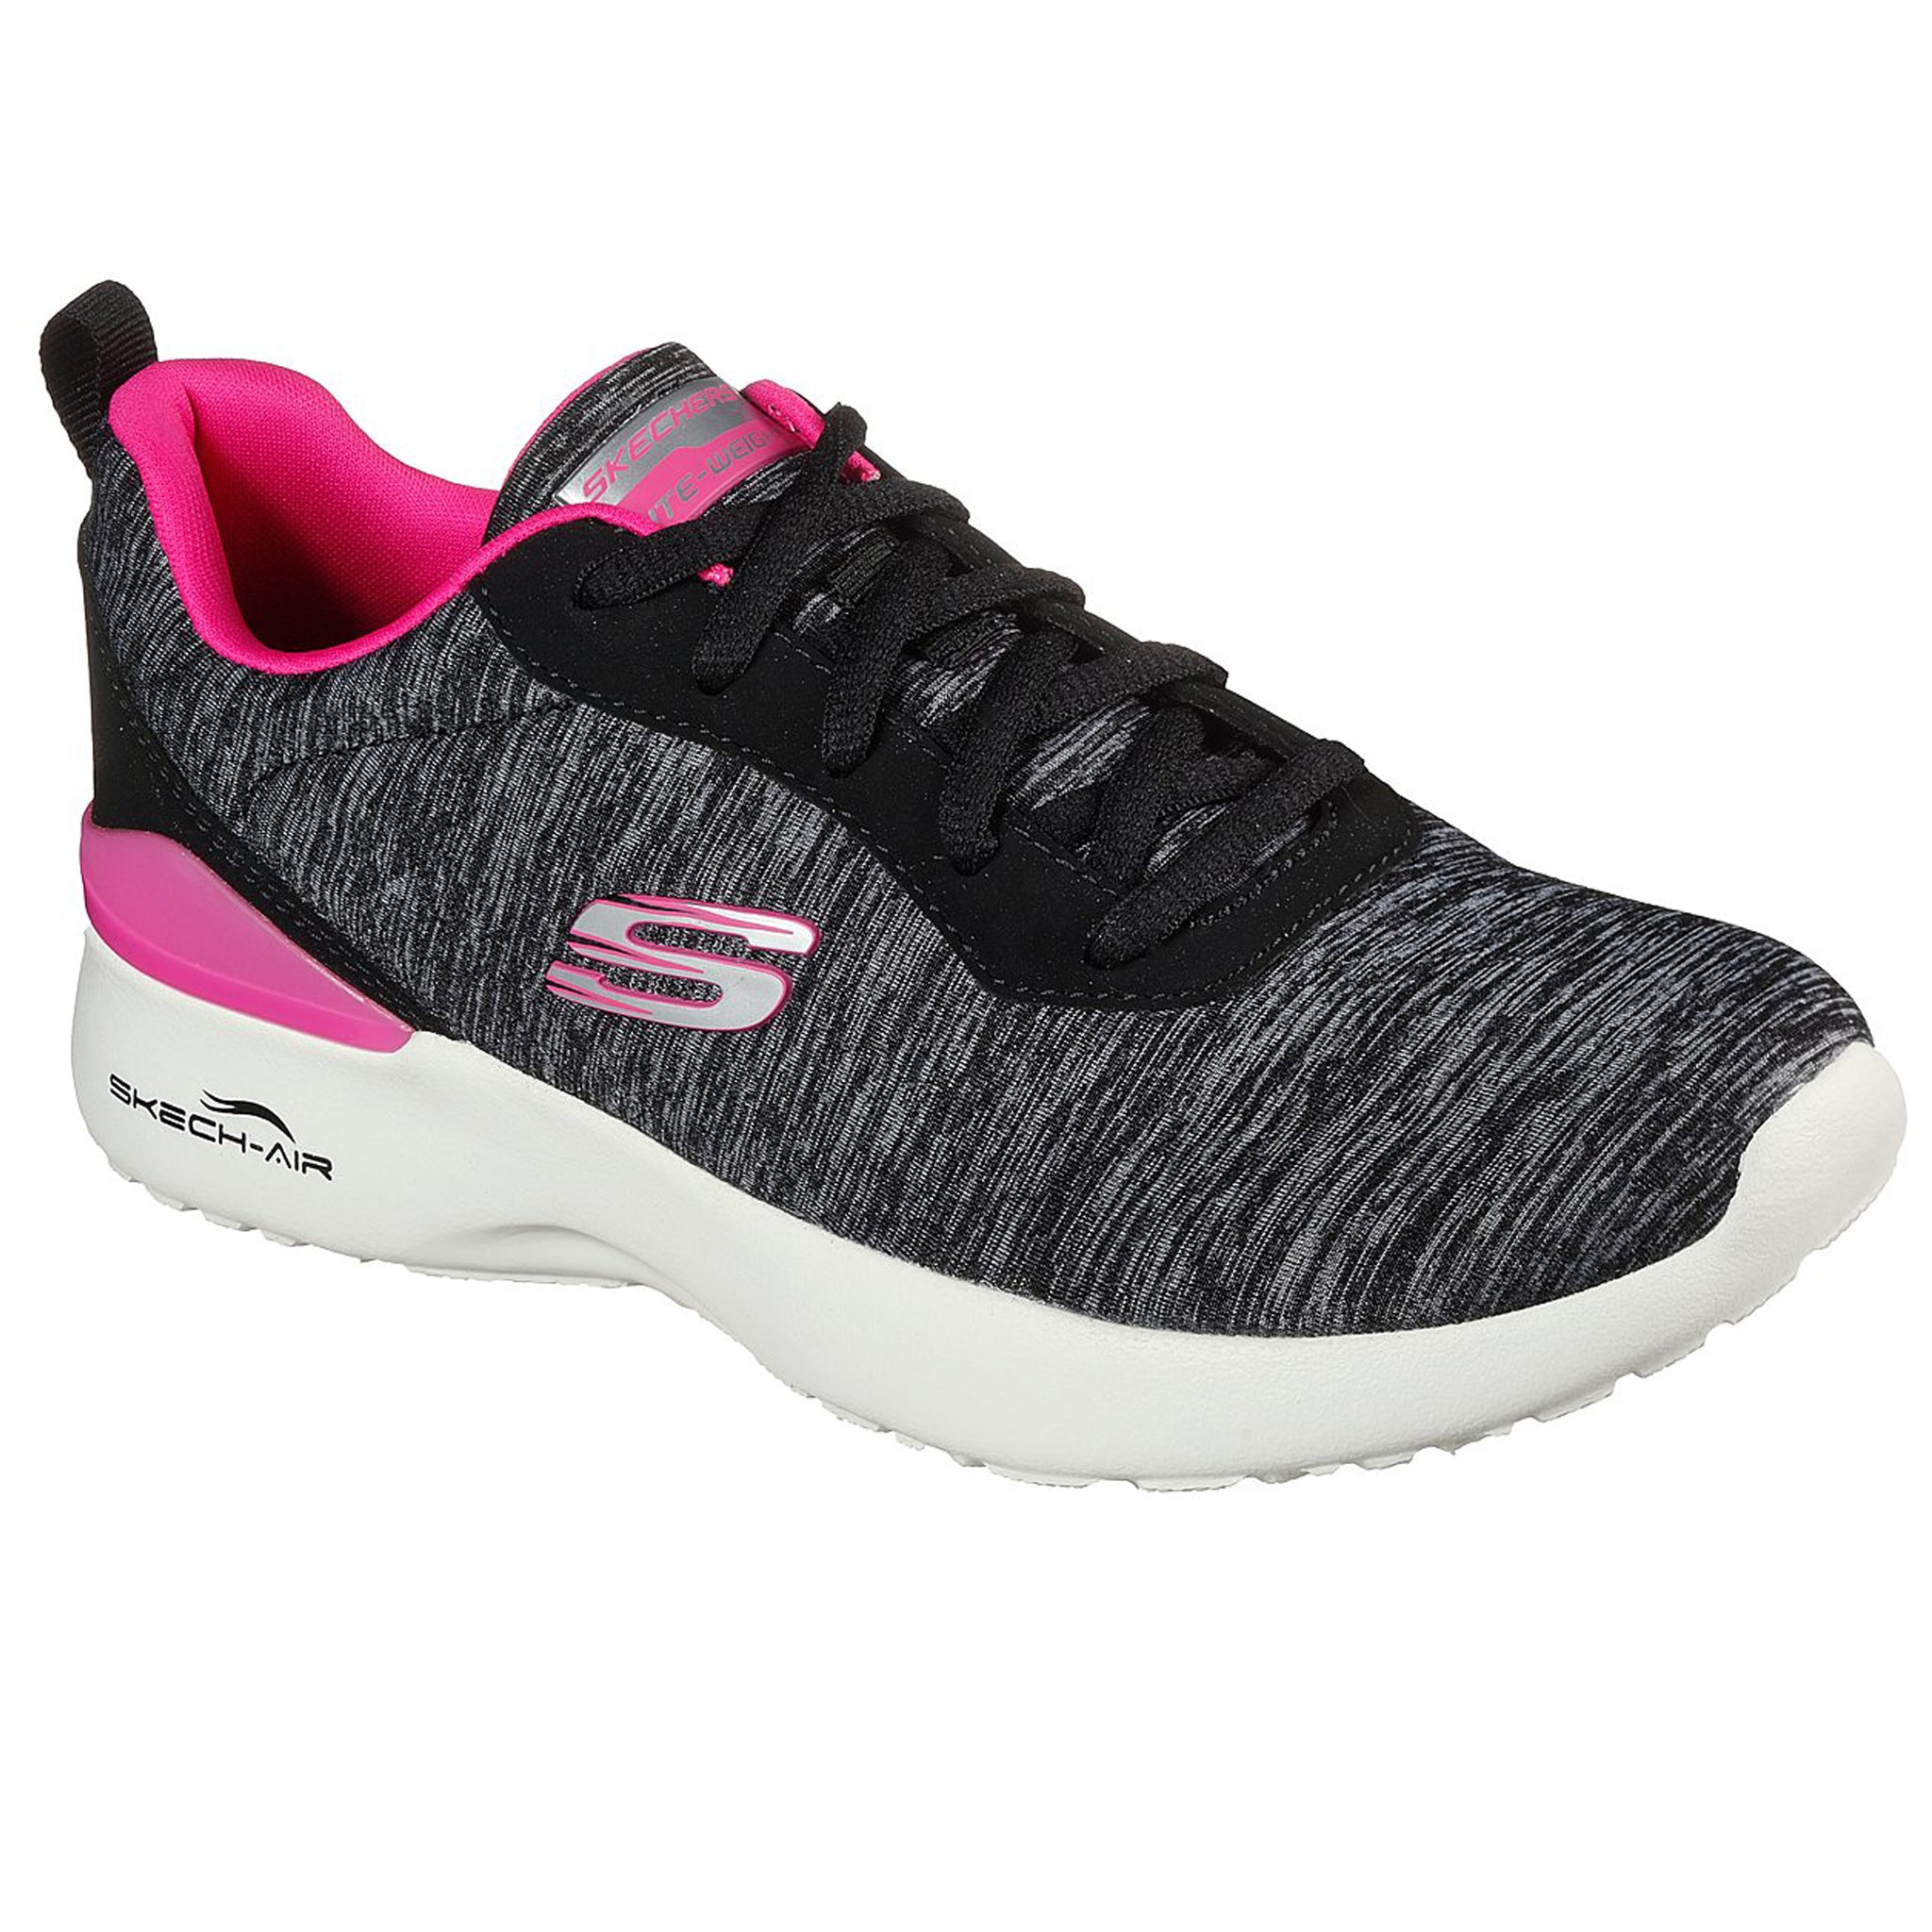 Sh Shoe 149344 Dynamight and Women\'s Skech-Air – Waves Store Paradise More Athletic That Skechers